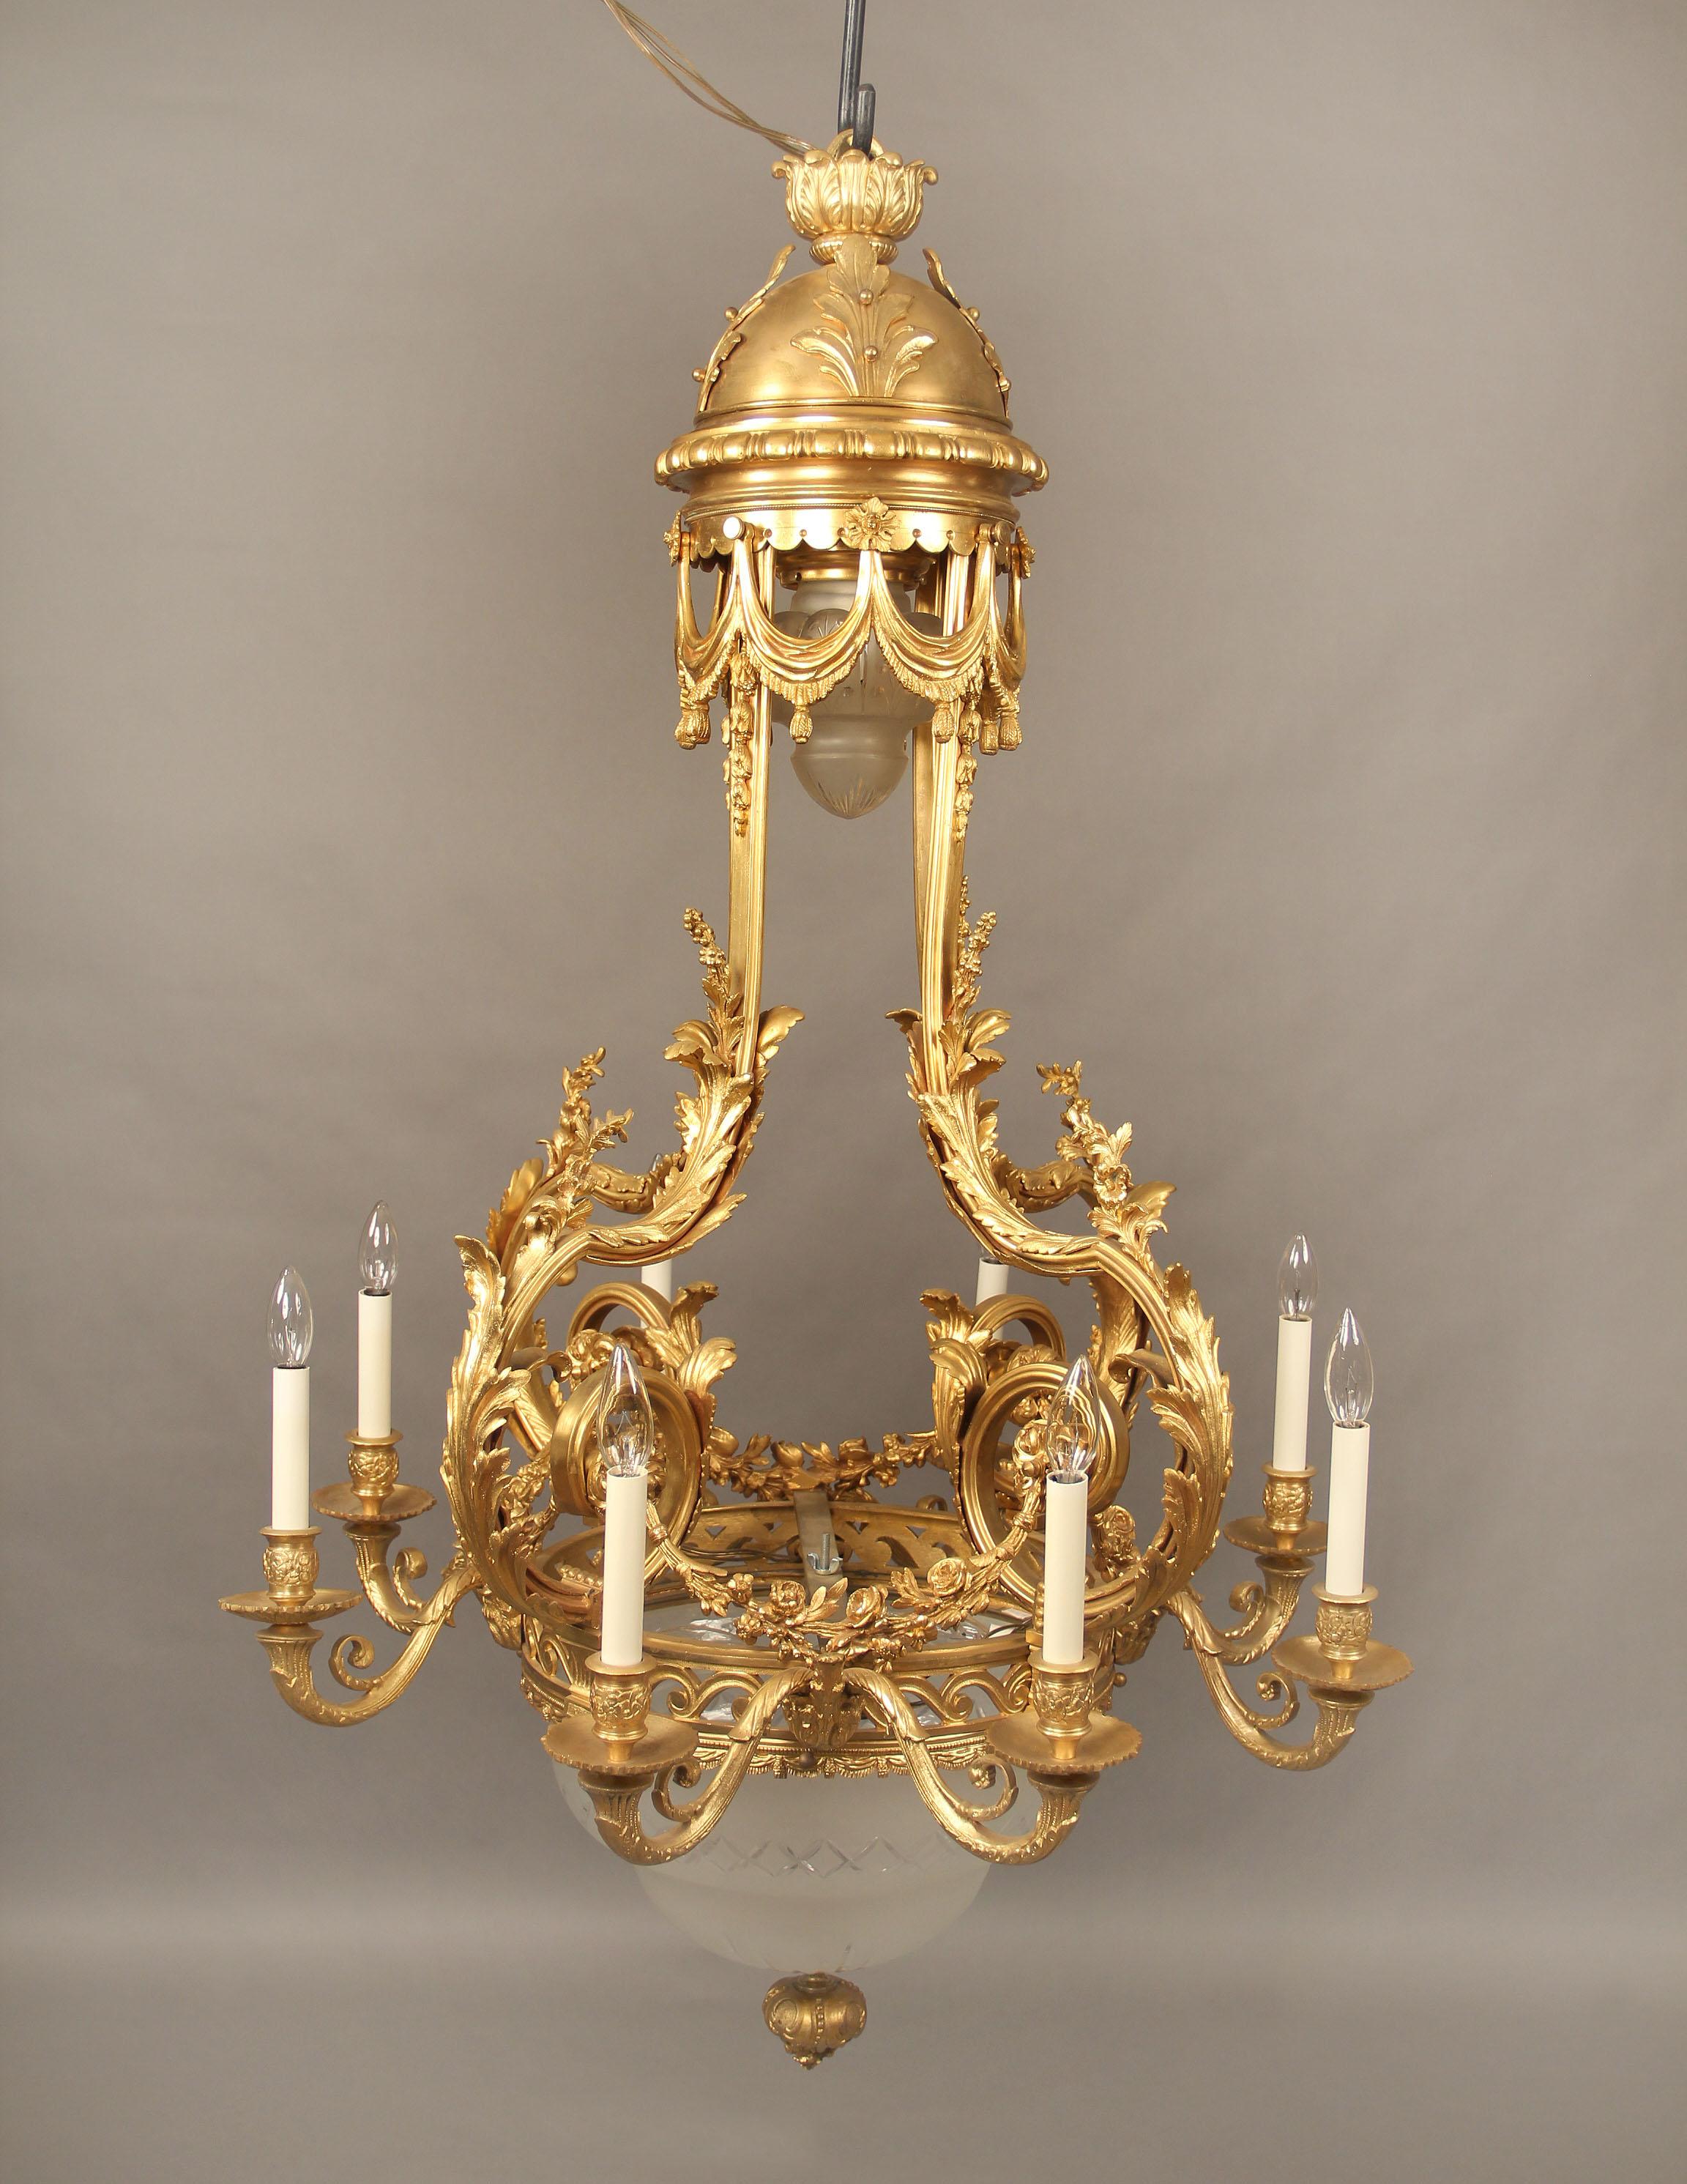 A fine late 19th century gilt bronze thirteen-light chandelier.

A gilt bronze floral and foliate frame with casted scrolled arms, the top shaped as a dome with flowing curtains and a lit shade, the bottom centered with an etched crystal bowl.